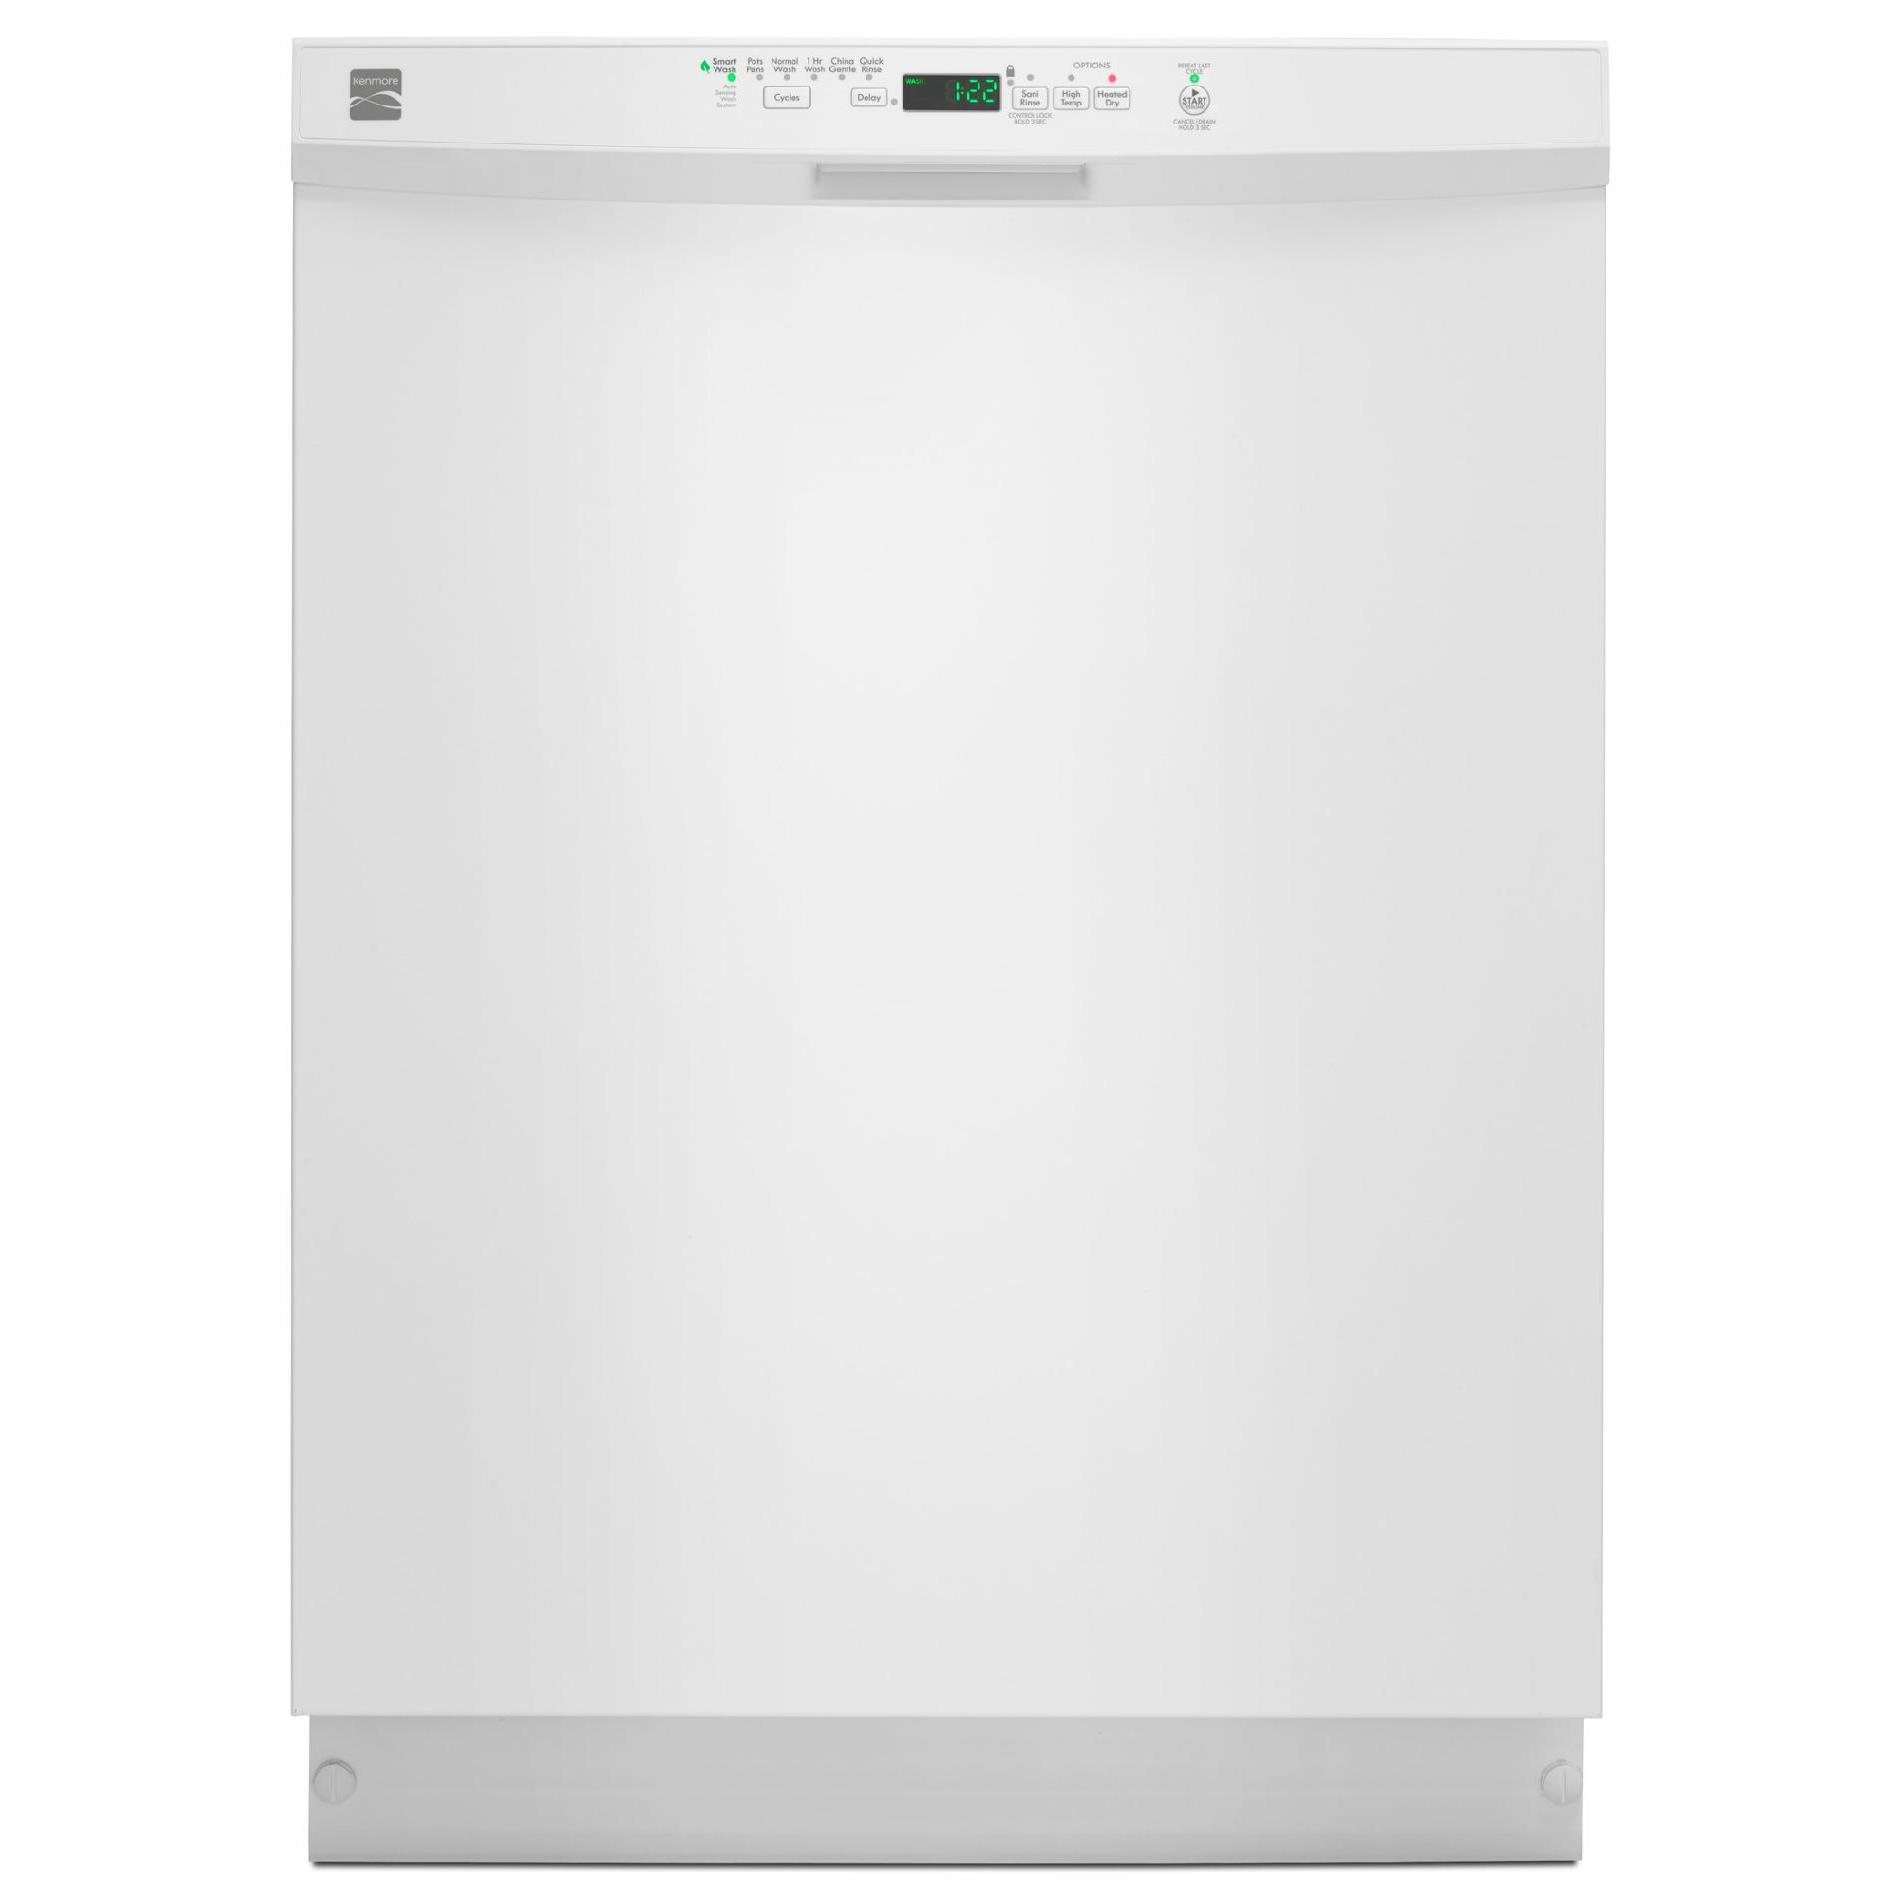 Kenmore 13222 Dishwasher with Steel Tub 